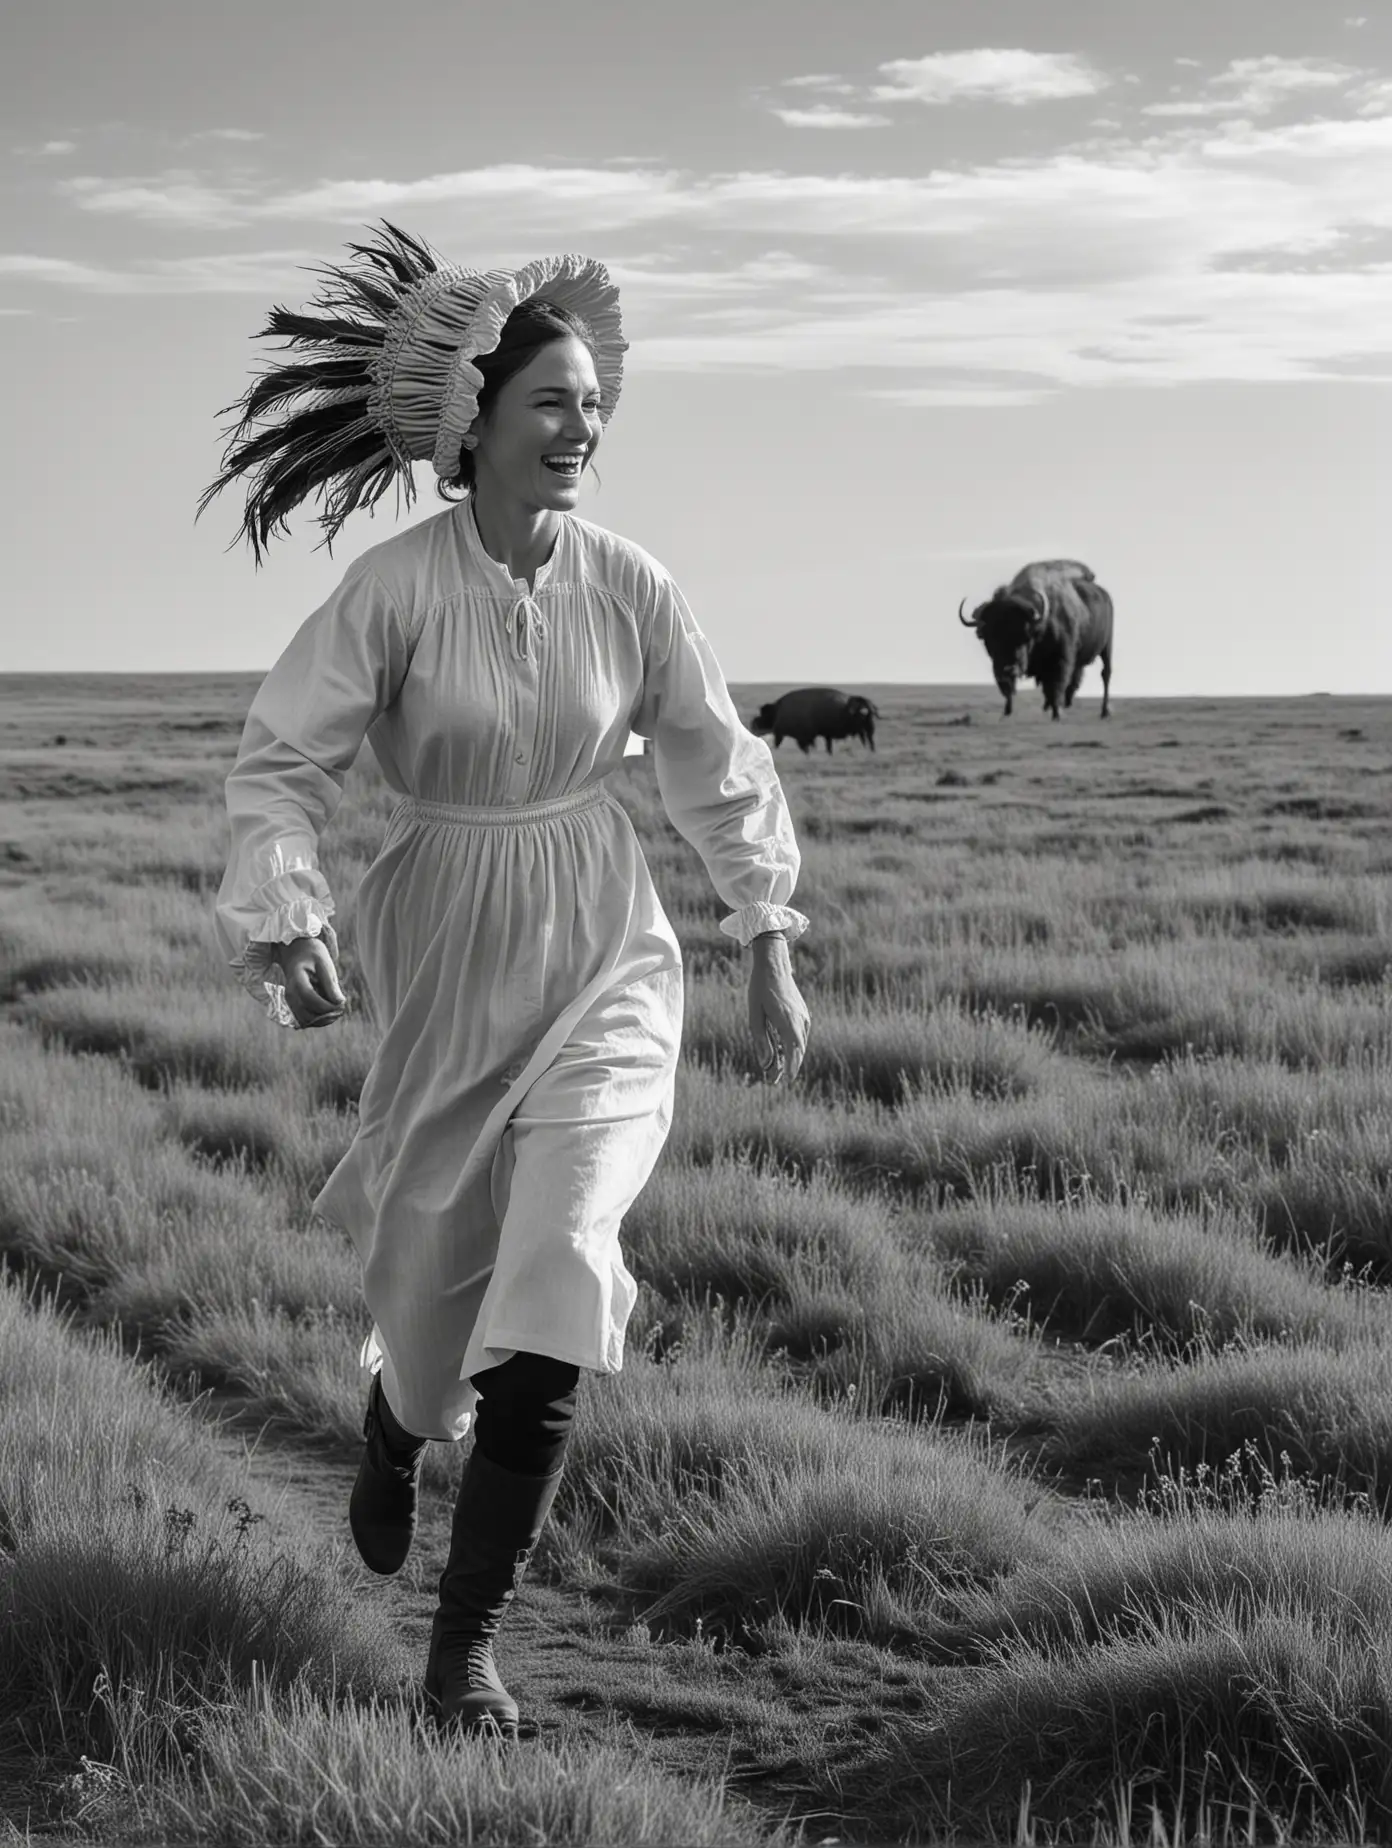 Pioneer Woman Running Through Prairie to New Land with Buffalo in Black and White